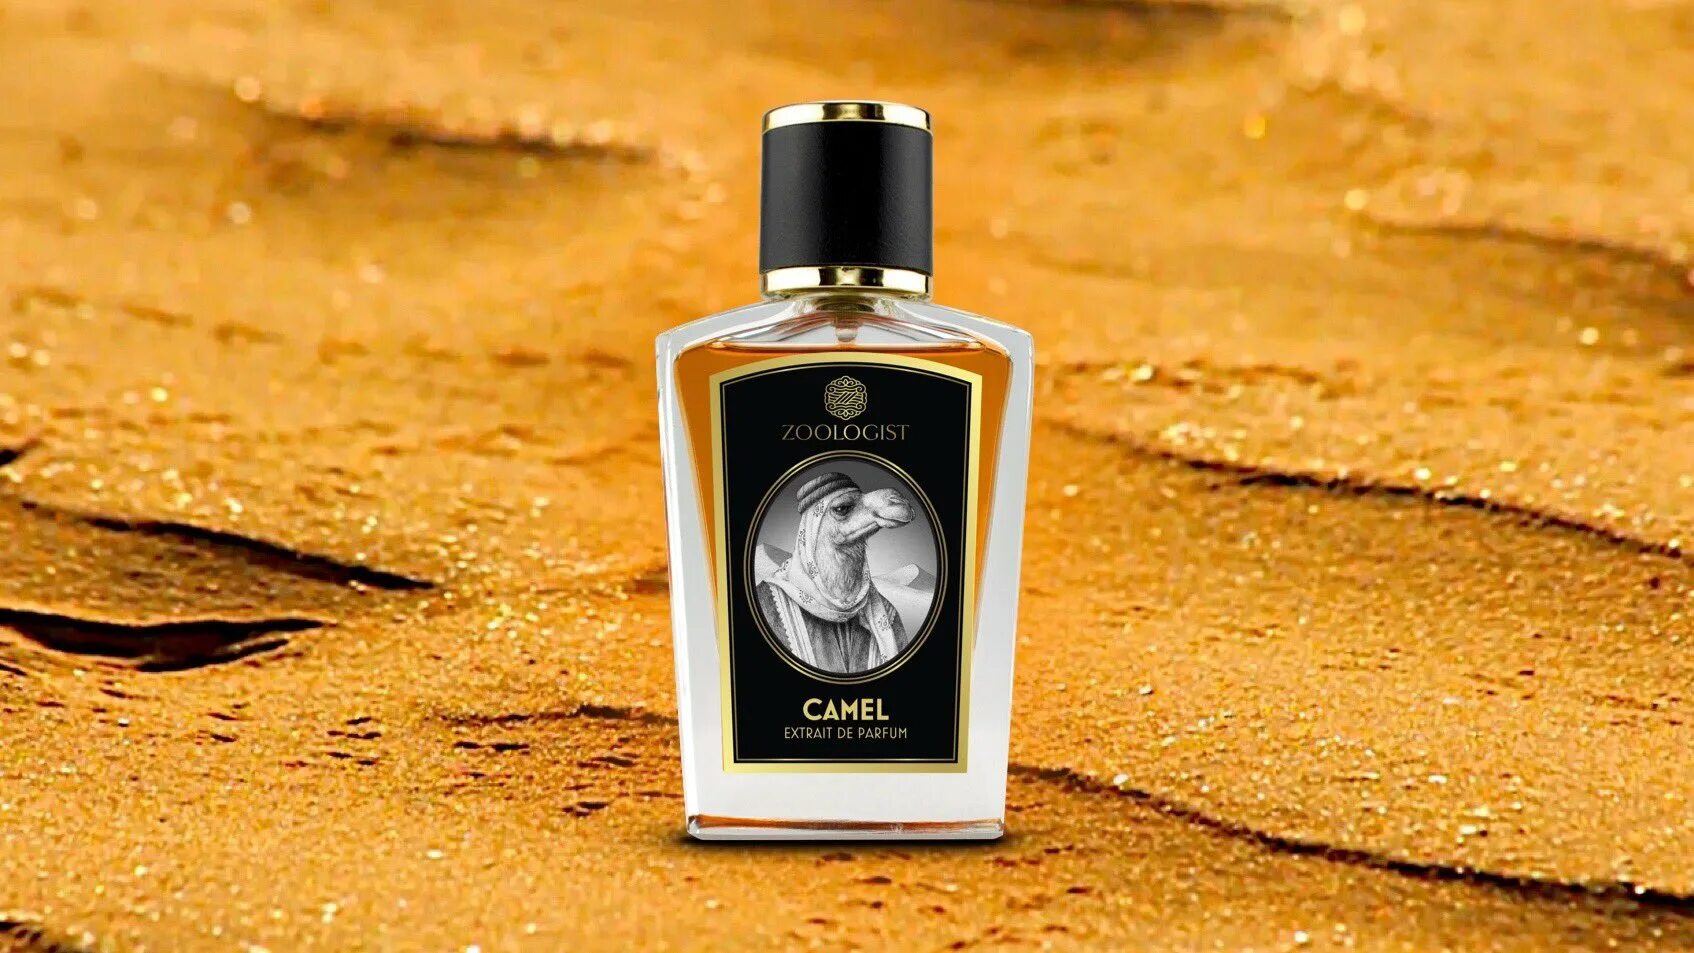 Zoologist perfumes. Духи зоологист. Zoologist Perfumes Bee. Духи Camel. Dragonfly zoologist Perfumes.